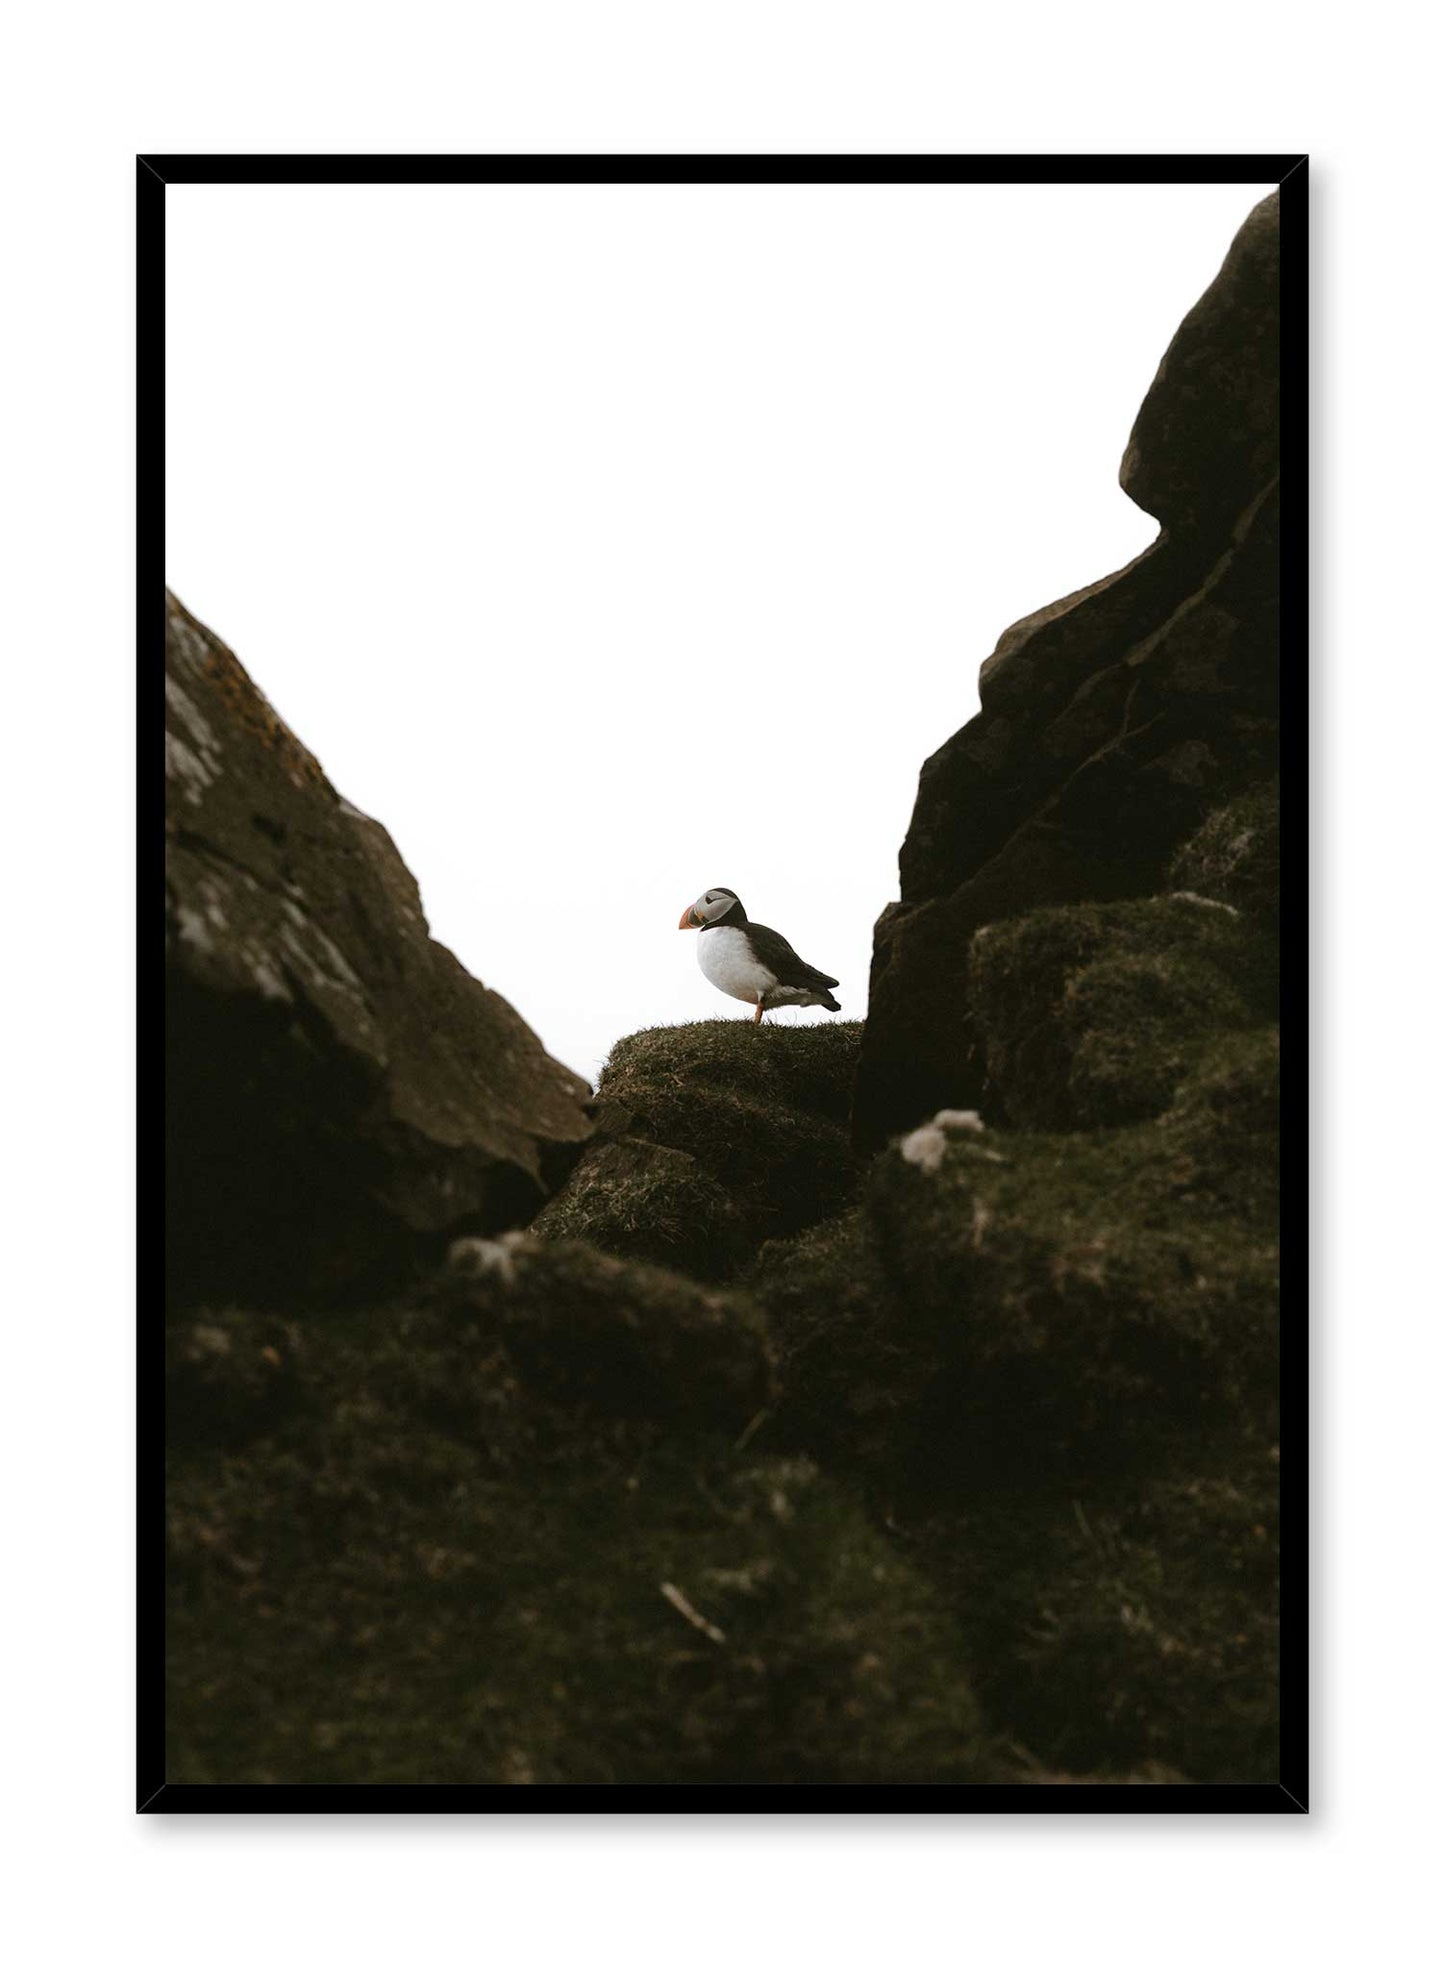 Puffin Portrait' is an animal and landscape photography poster by Opposite Wall of a puffin bird standing atop rocky boulders.